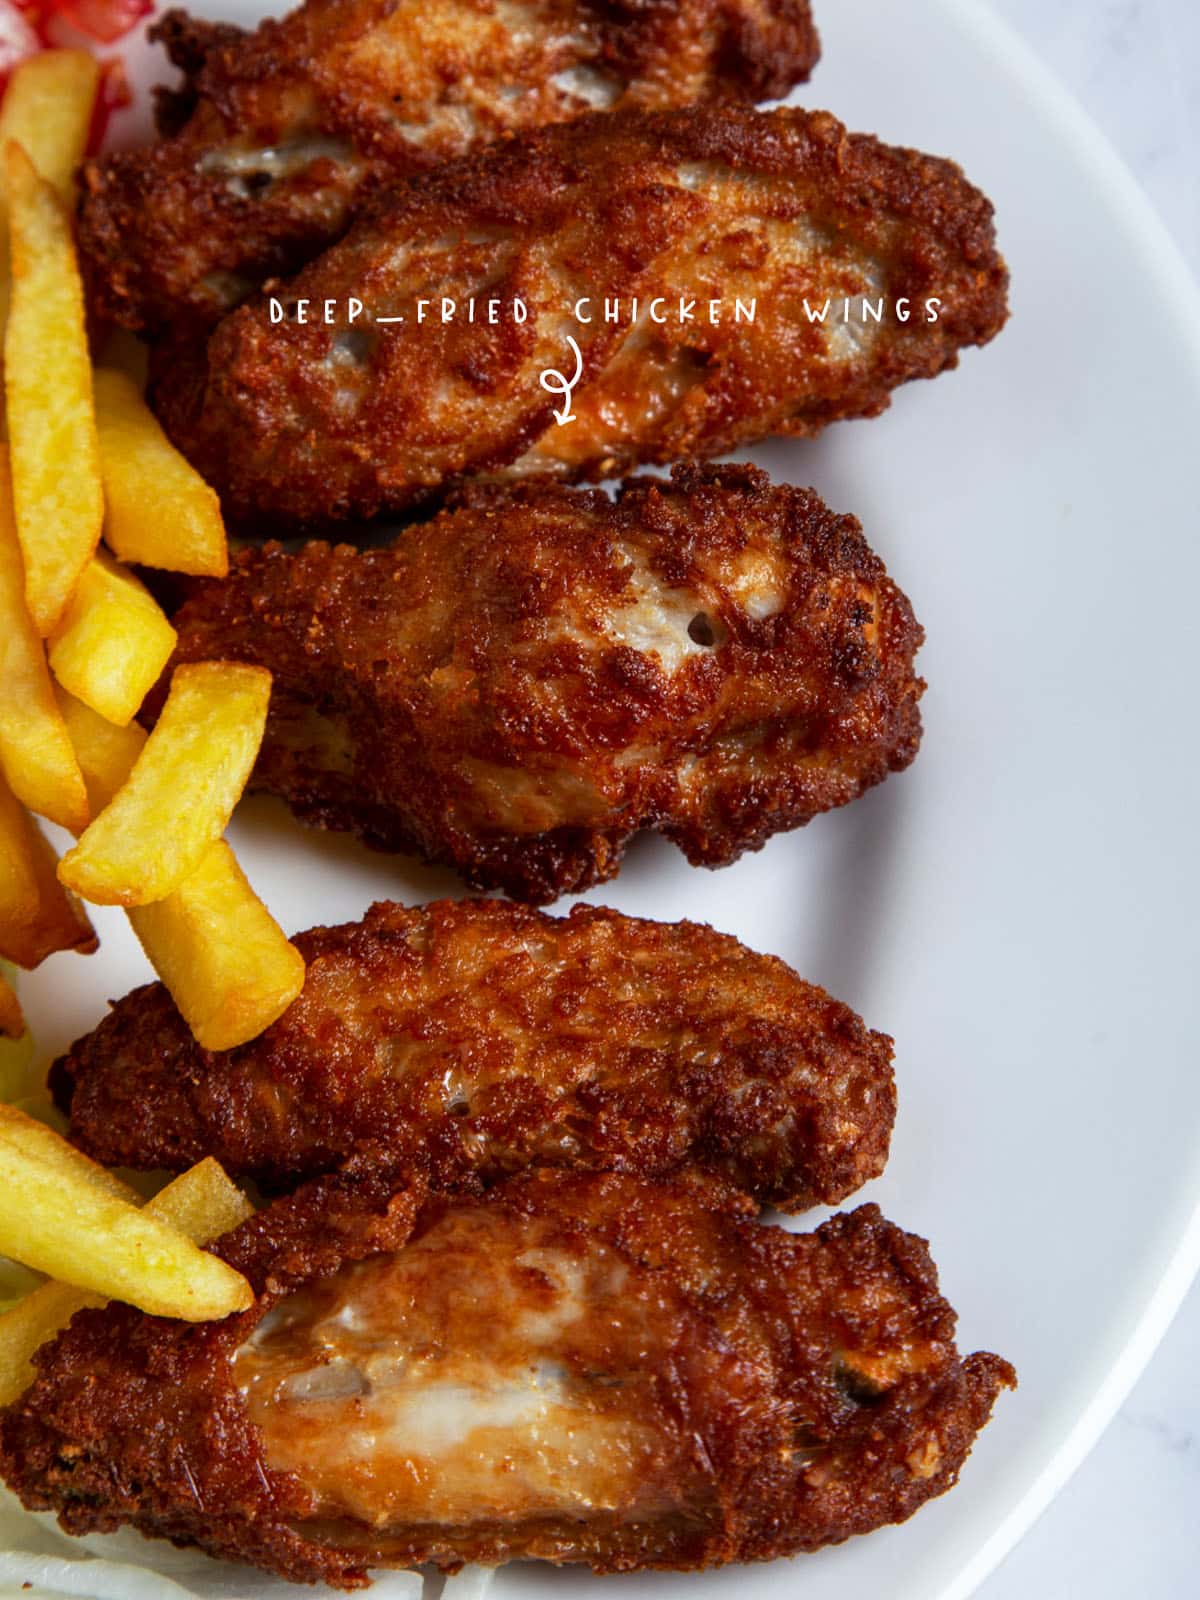 It's game day, and you've got a craving for some delicious buffalo wings. But no matter how much sauce you put on them, it seems to always slide right off. Never fear – we're here to show you how to make your sauce stick to your wings like nothing else